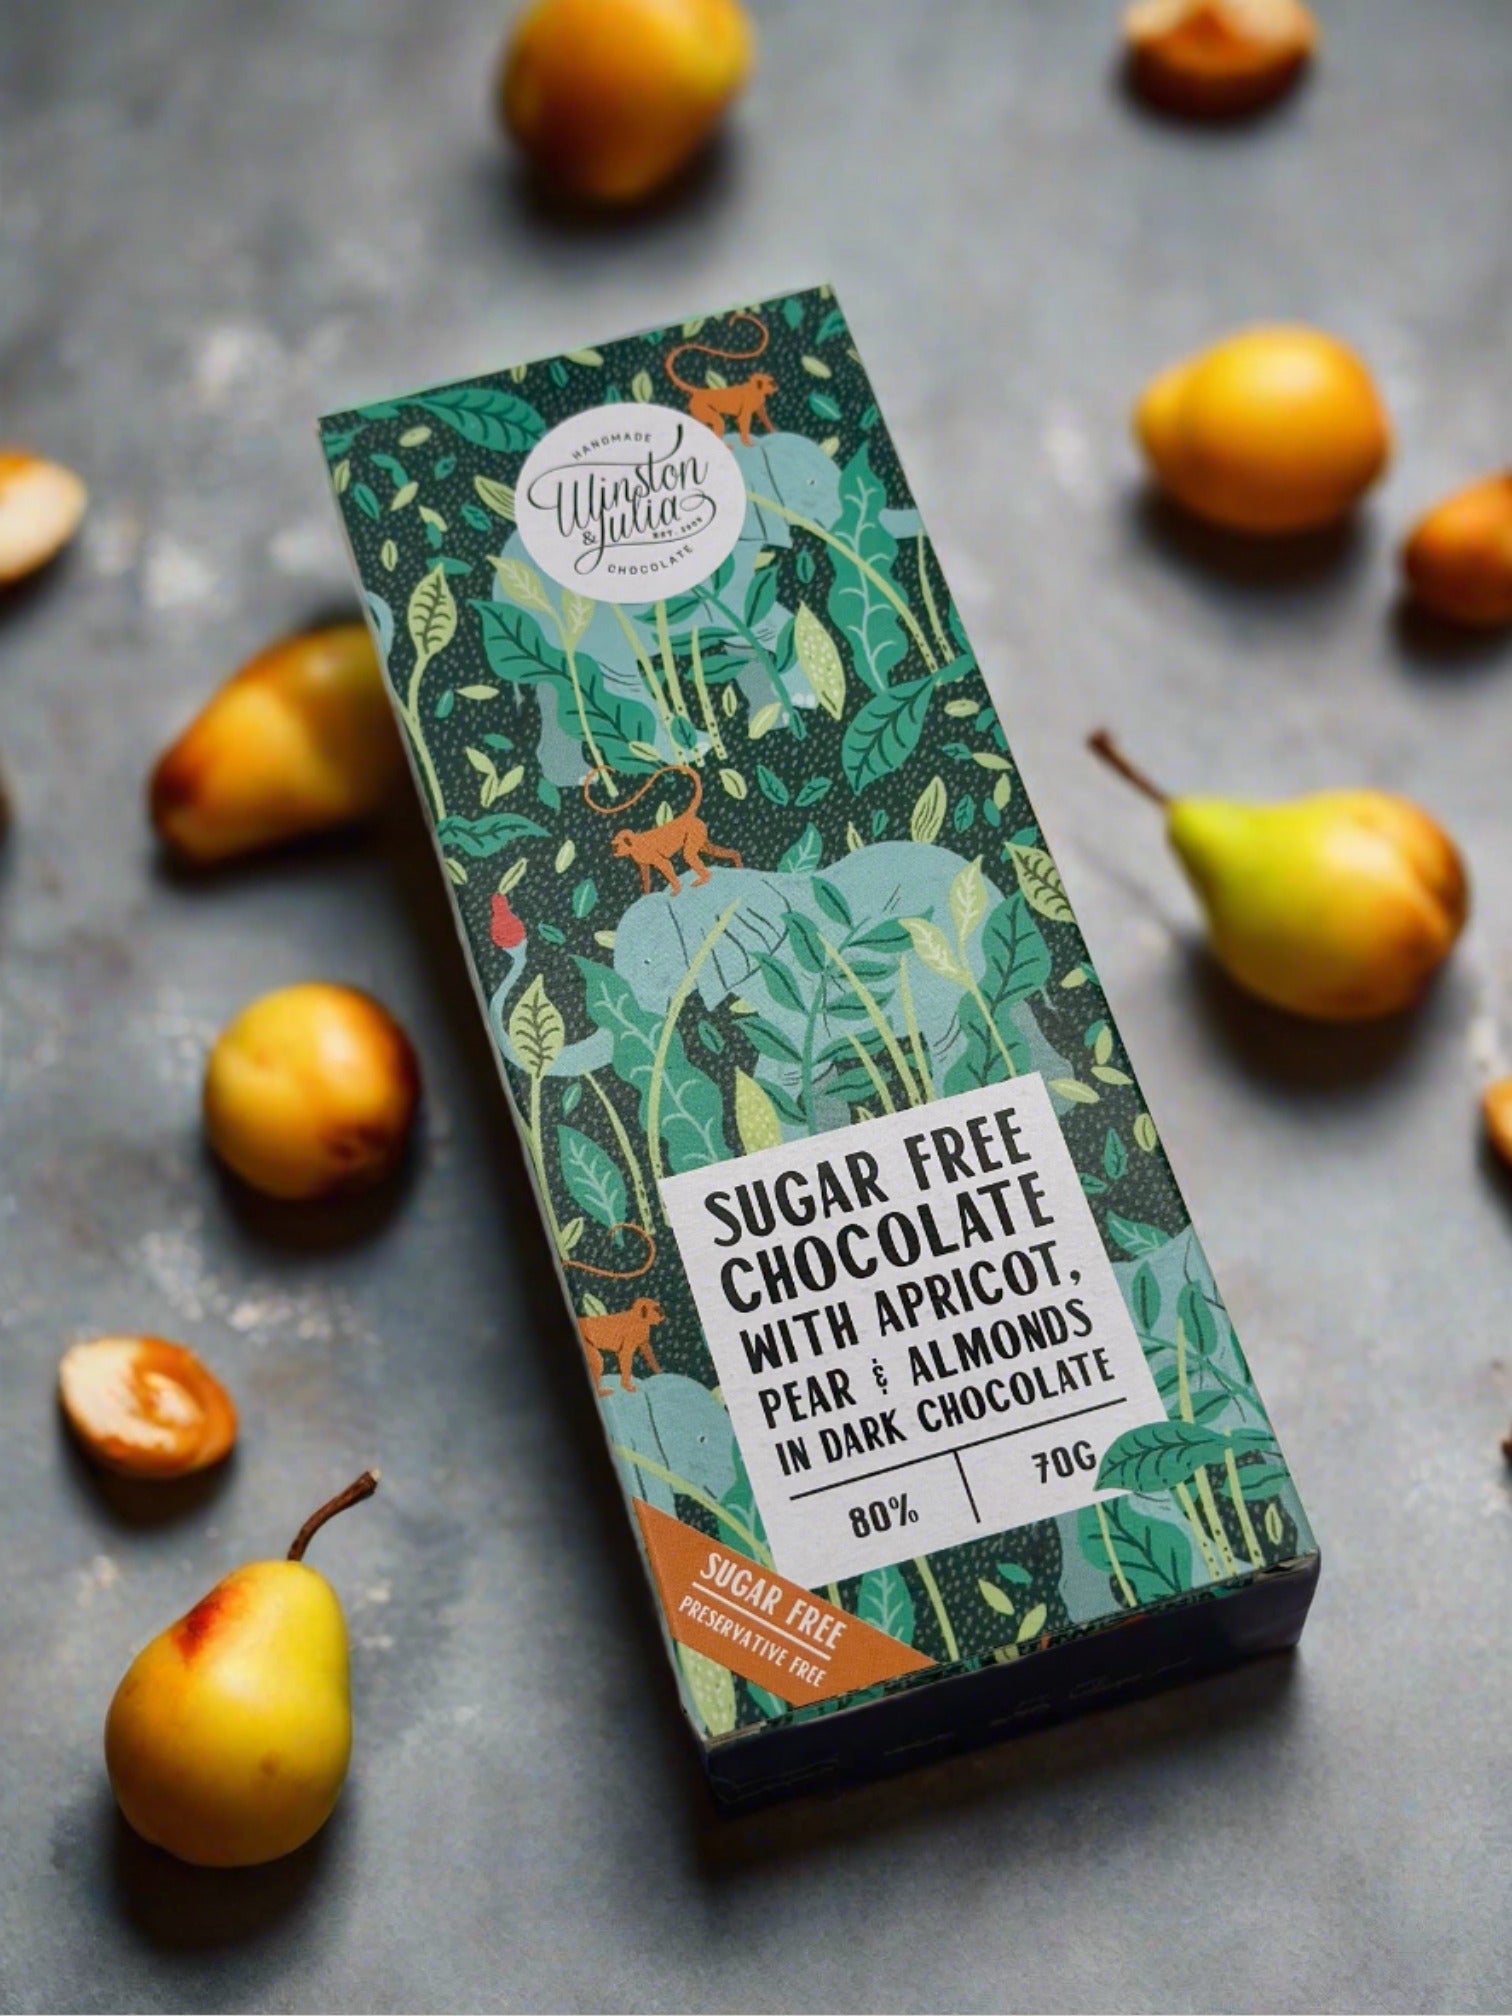 Sugar Free Dark Chocolate with Apricot, Pear and Almonds - Impala Online